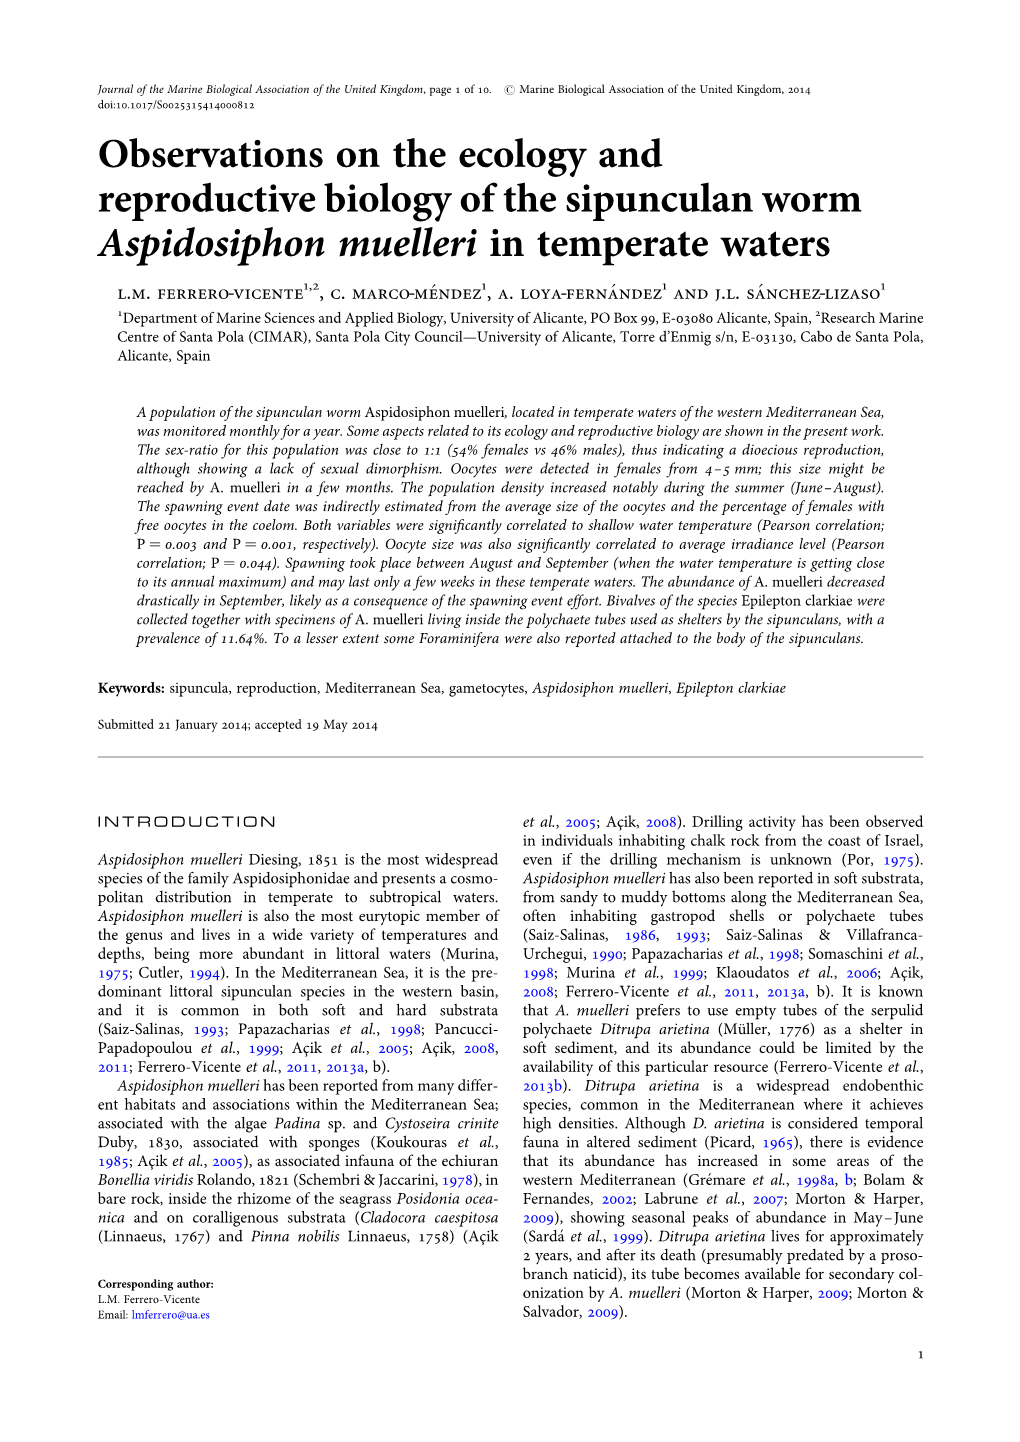 Observations on the Ecology and Reproductive Biology of the Sipunculan Worm Aspidosiphon Muelleri in Temperate Waters L.M